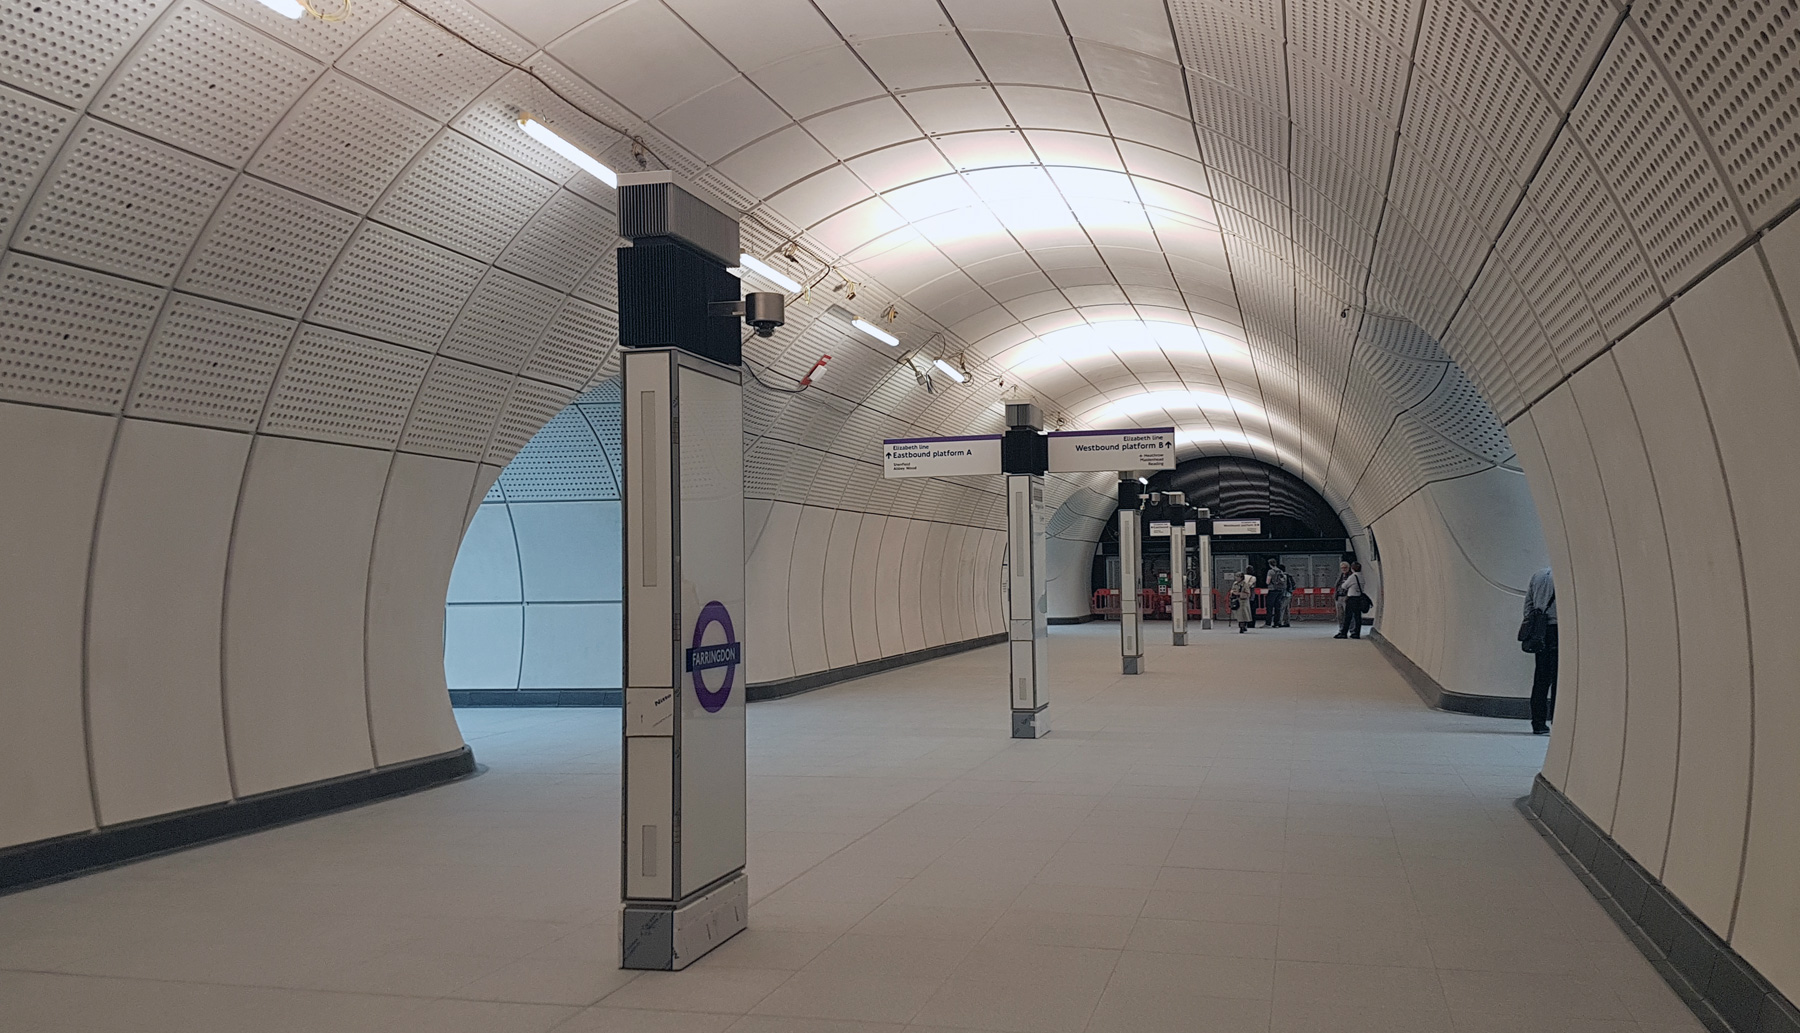 Crossrail aims to start Trial Operations "within days"